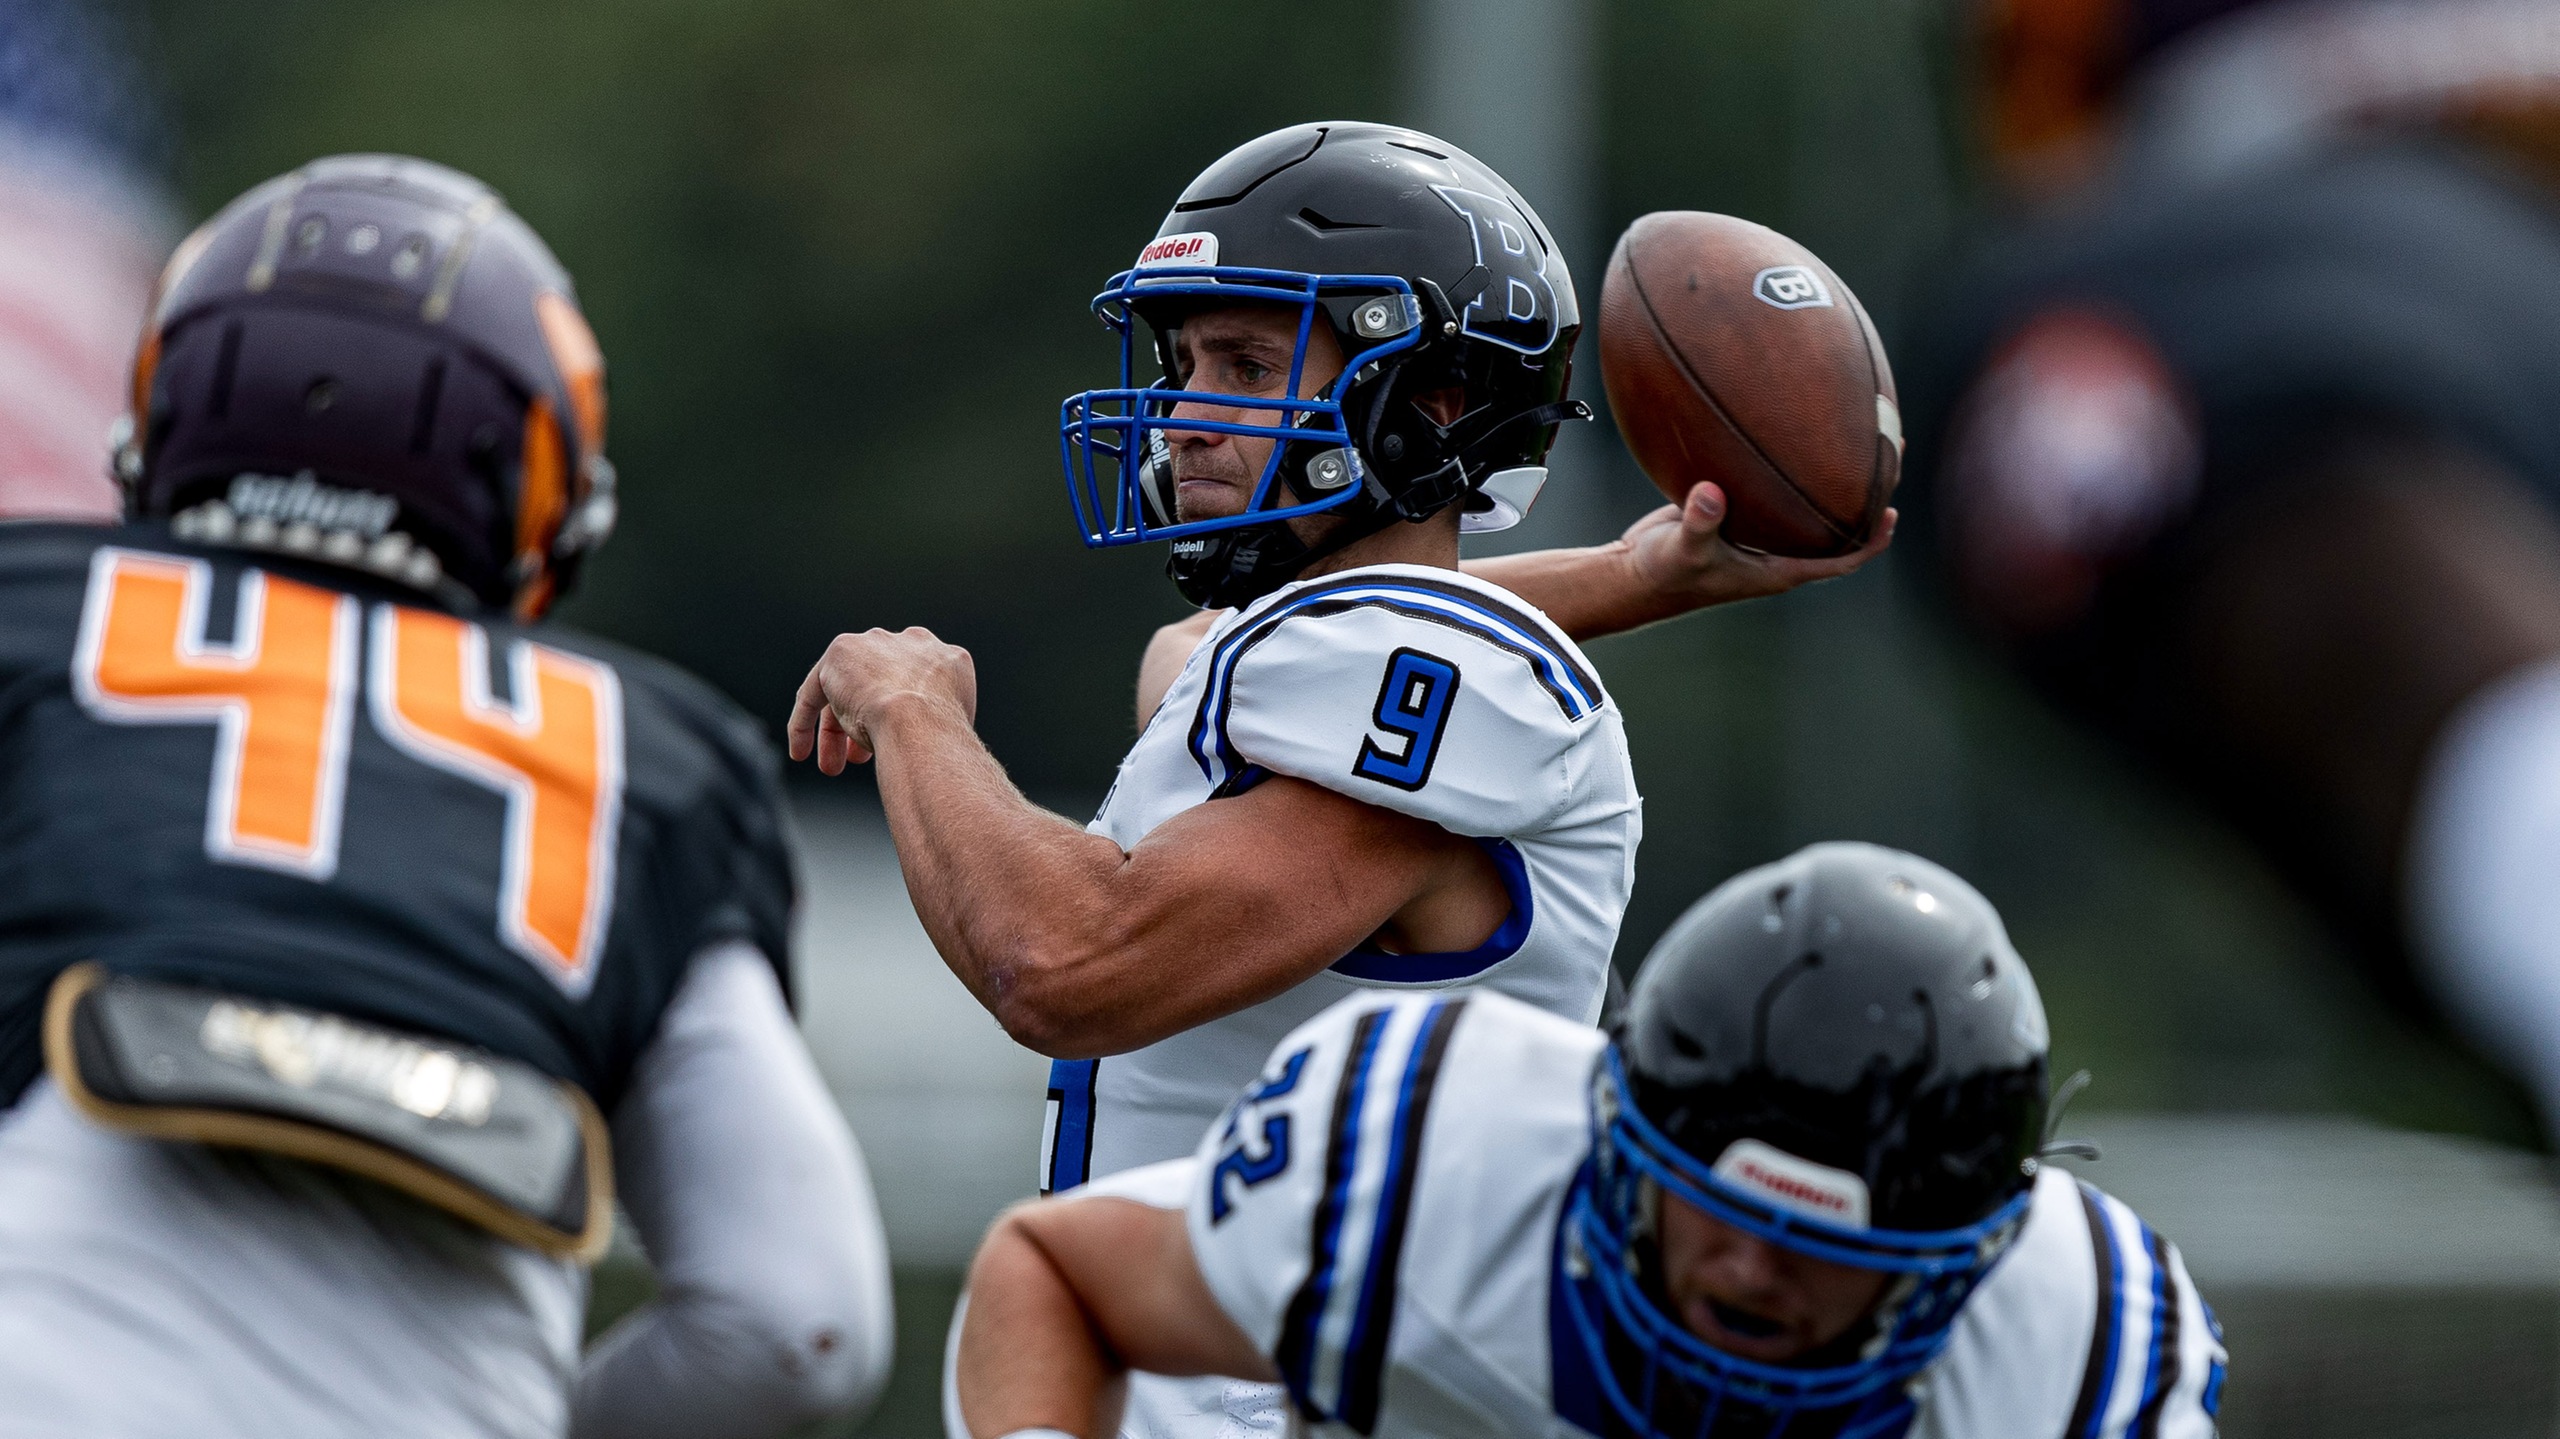 Waid totals five touchdowns in 62-12 win at AIC